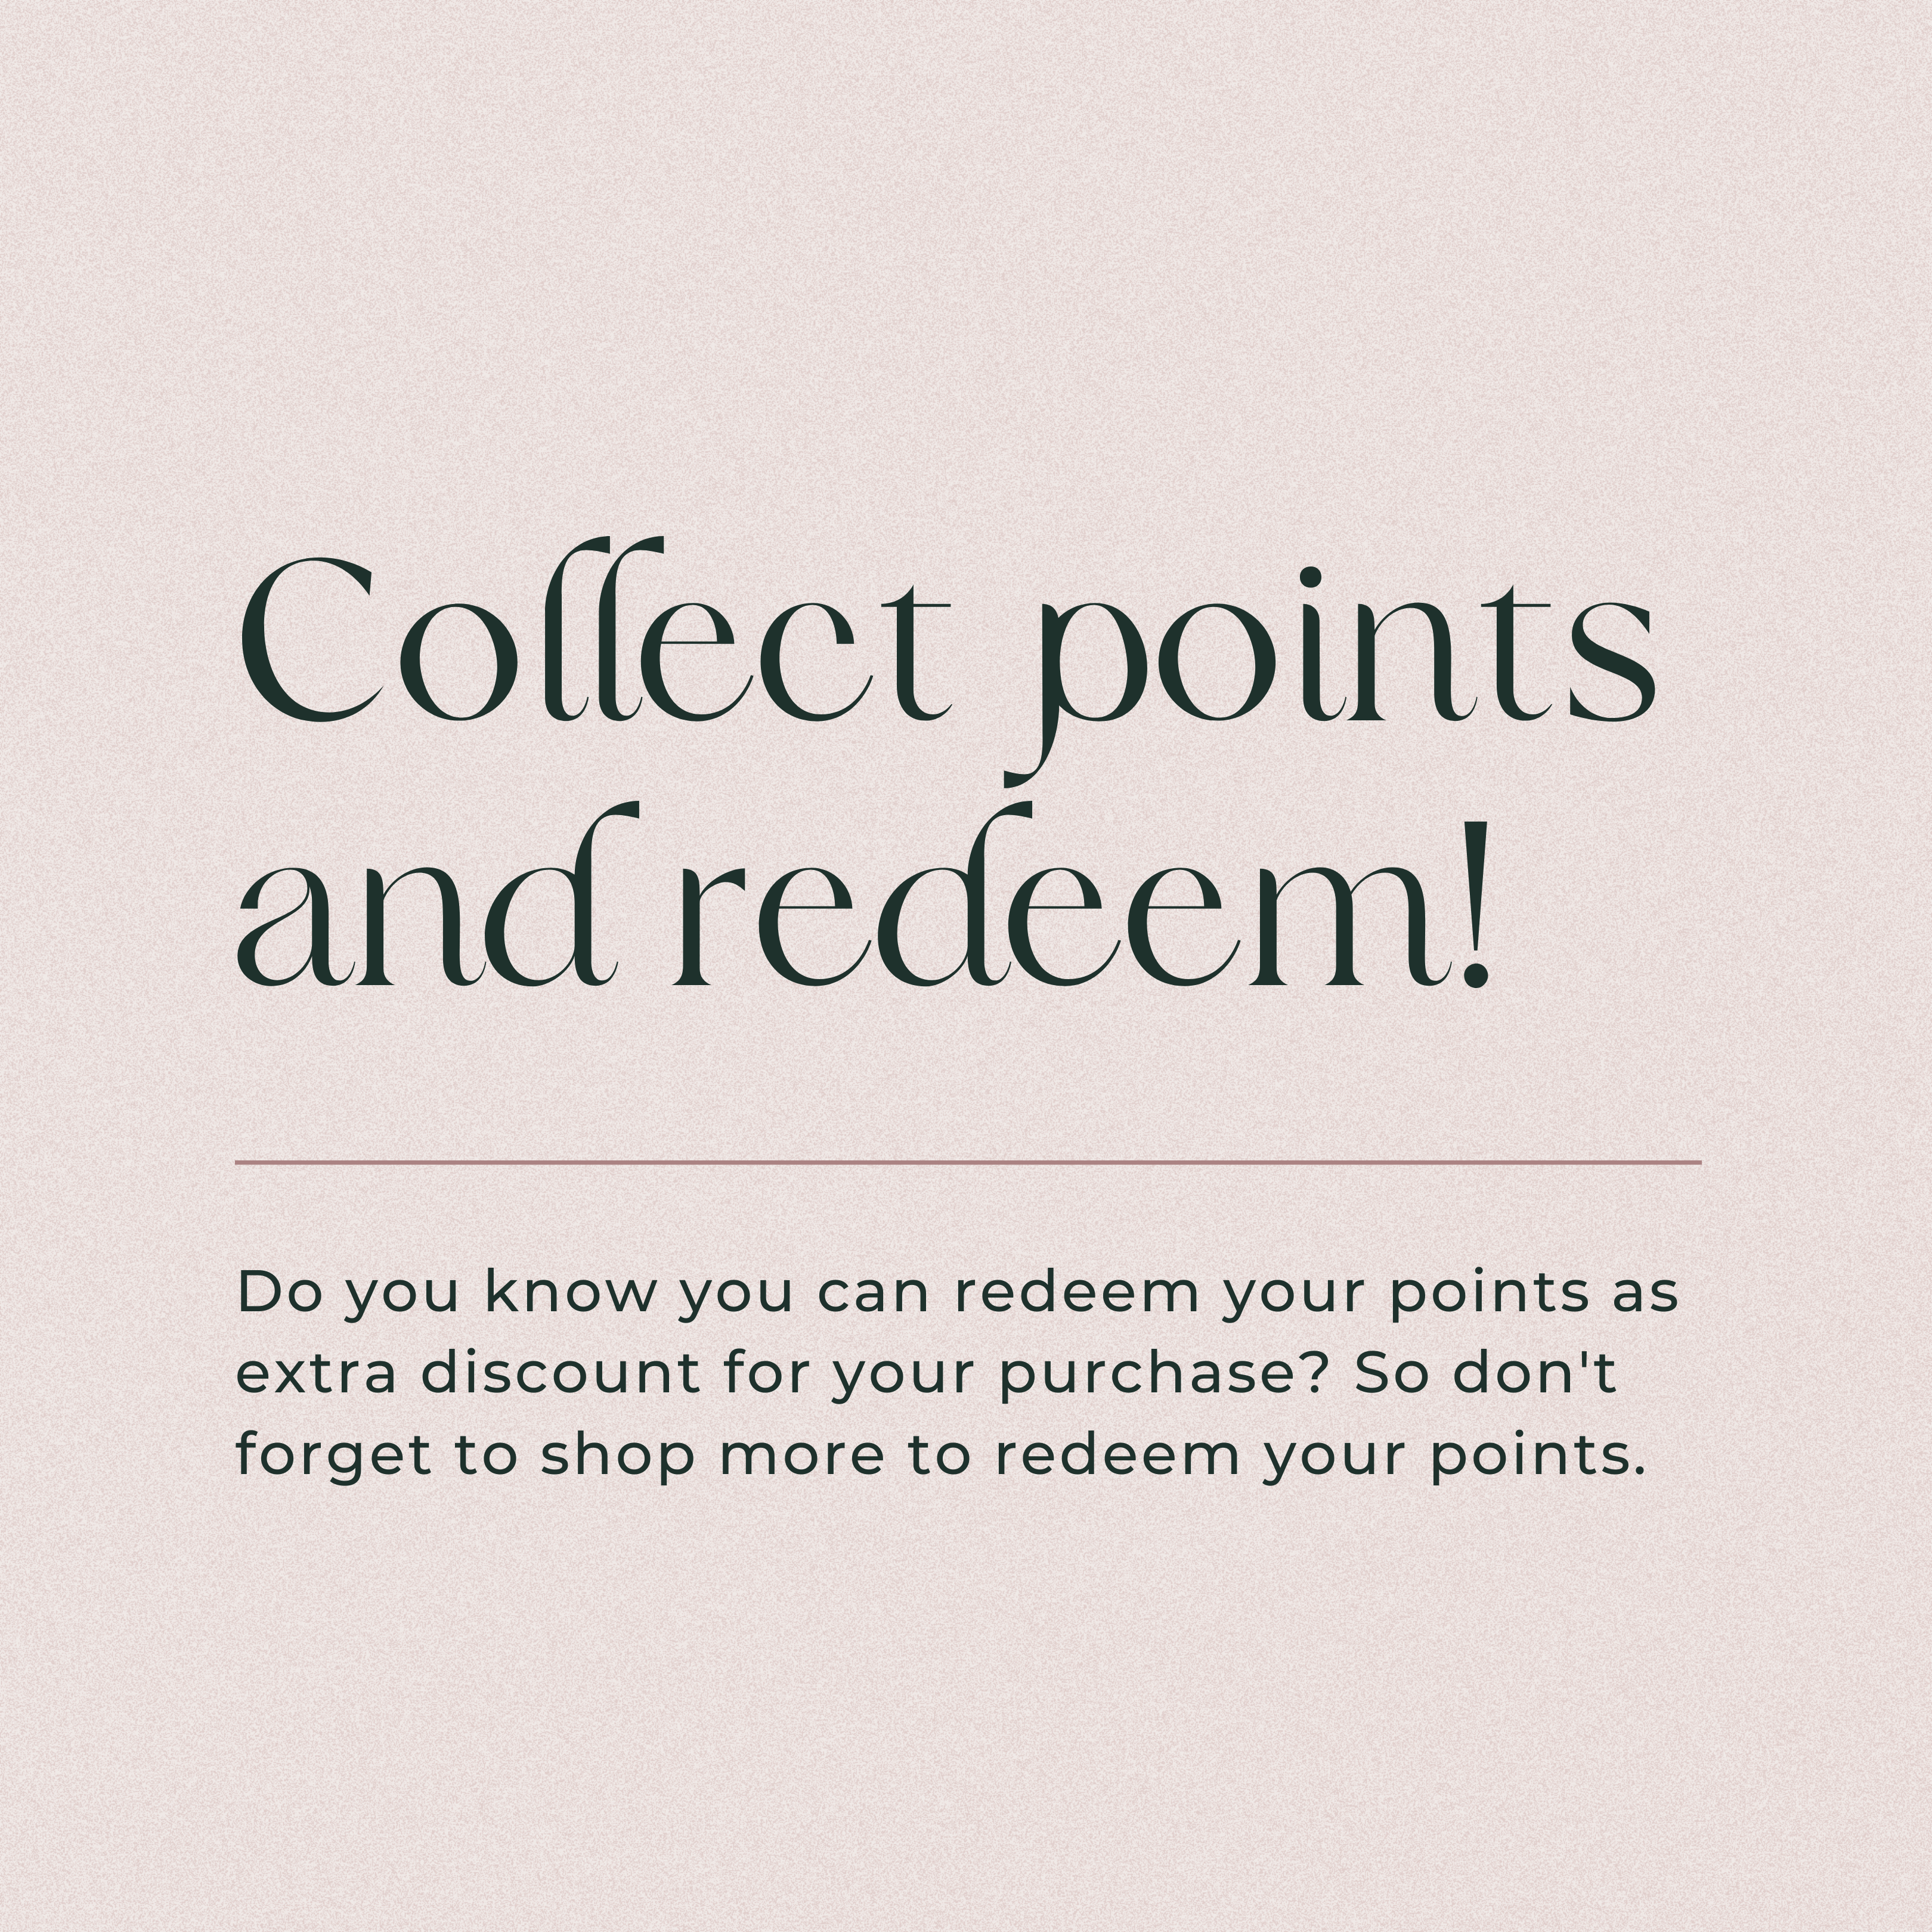 Collect points and redeem!